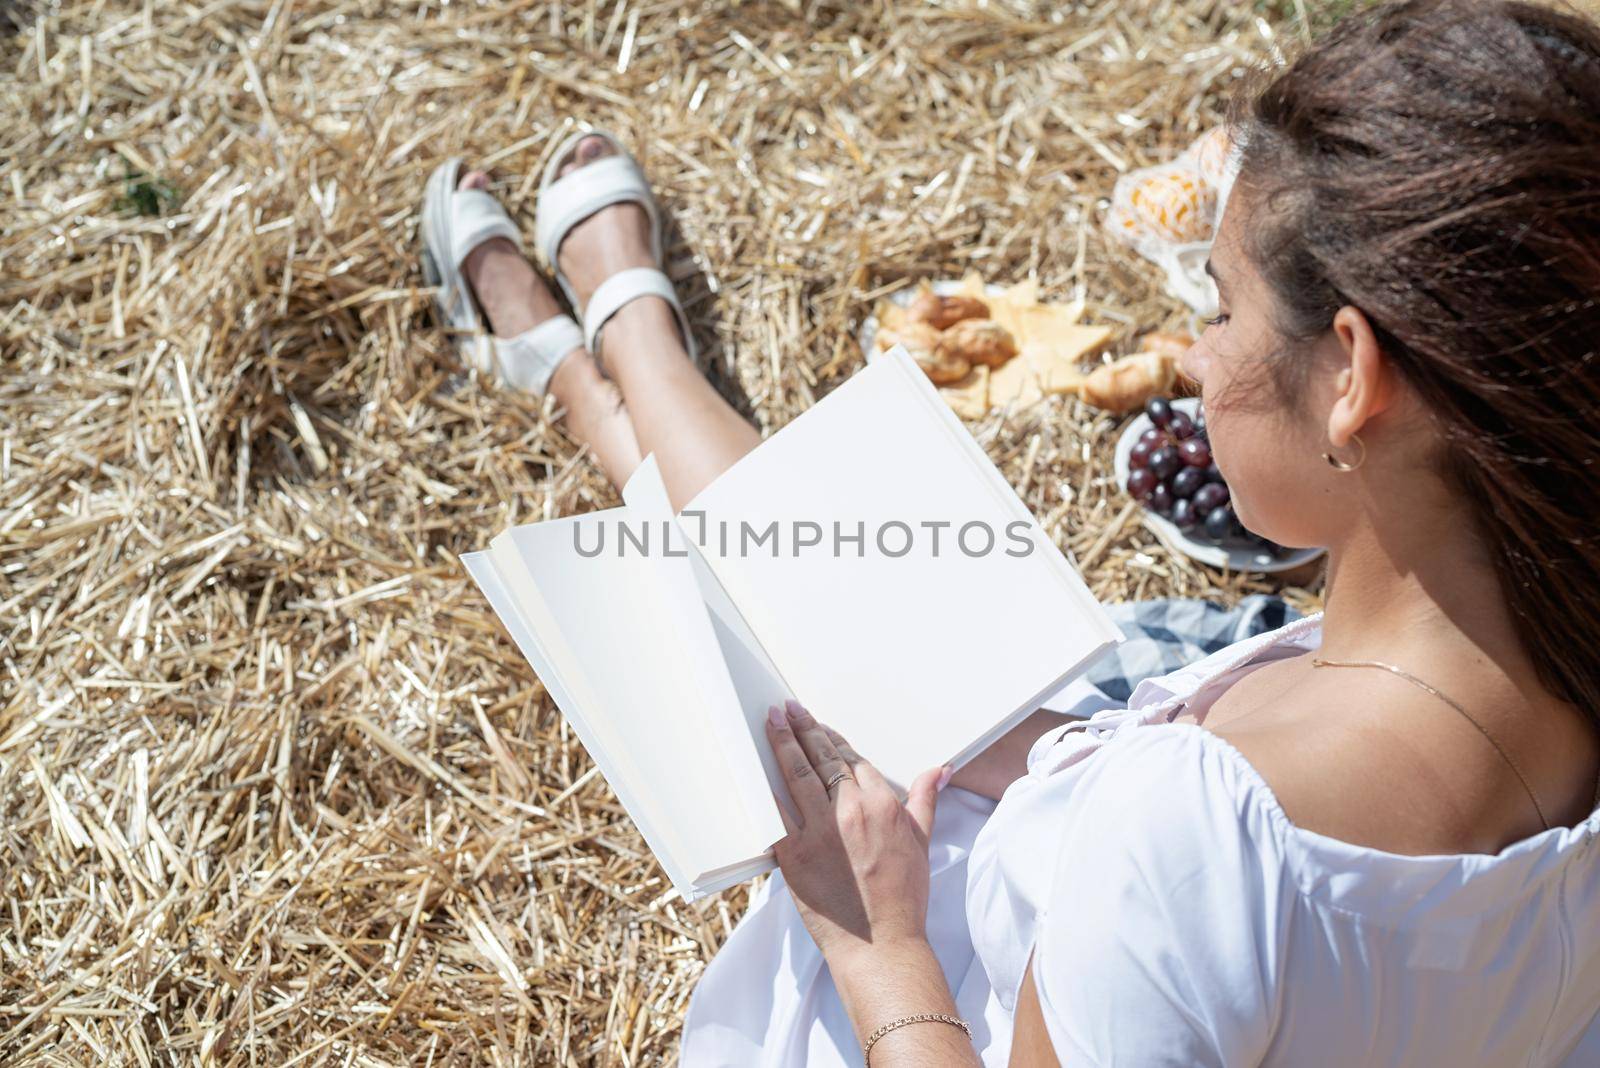 Picnic in countryside. Young woman in white dress sitting on haystack in harvested field, reading blank book. Book mockup